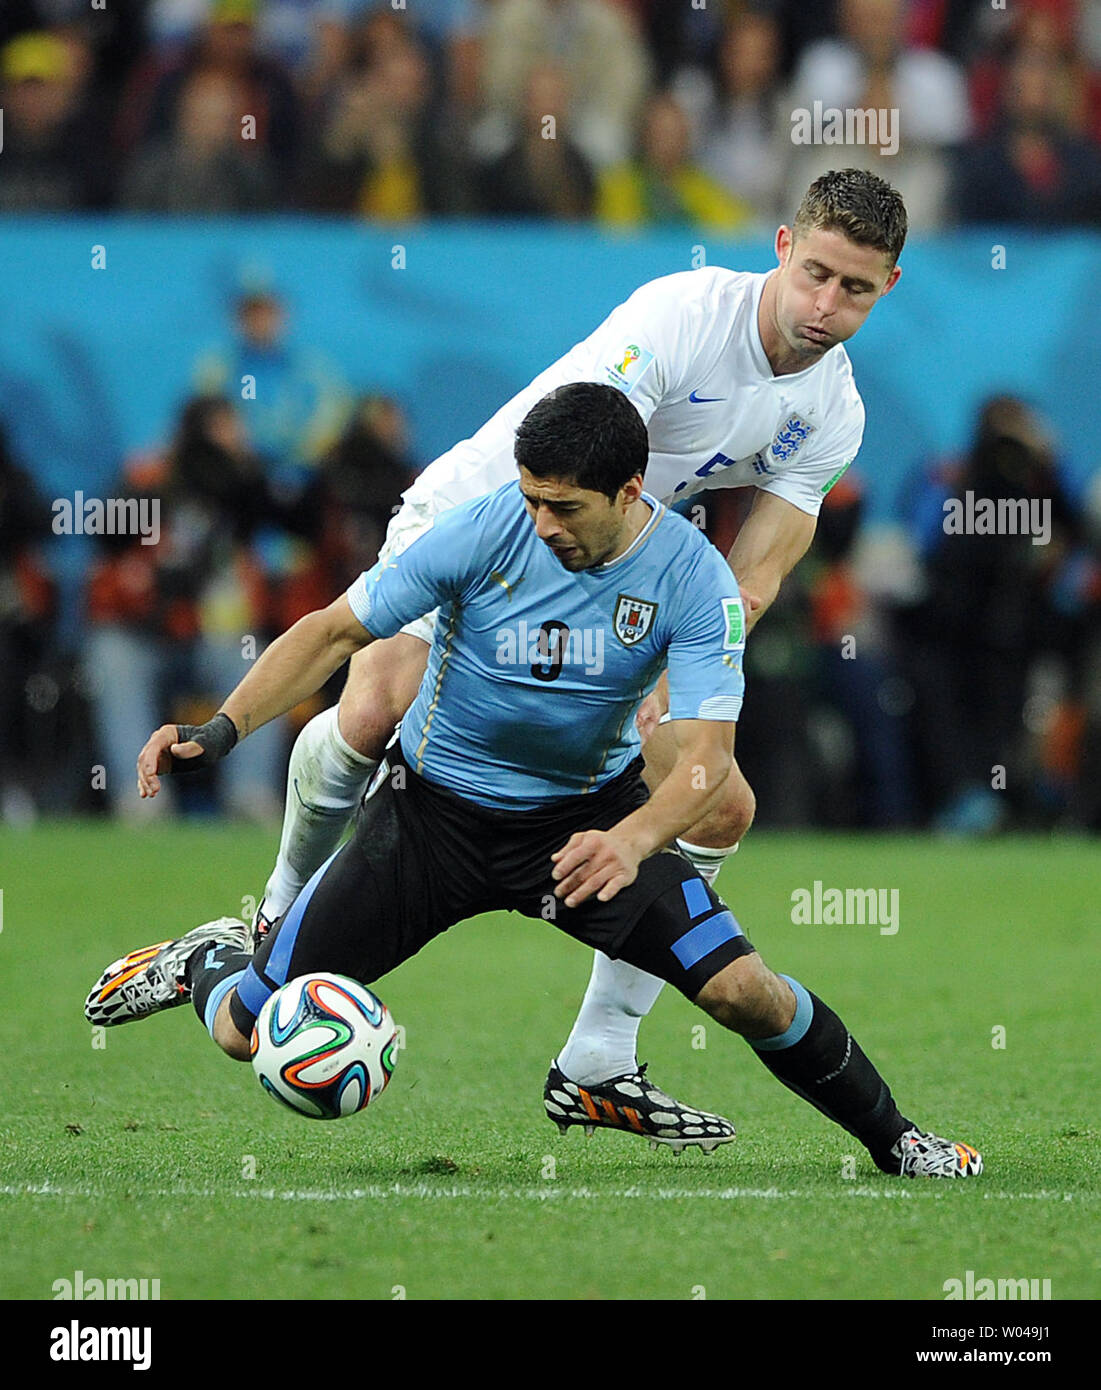 Luis Suarez (L) of Uruguay is fouled by Gary Cahill of England during the 2014 FIFA World Cup Group D match at the Arena Corinthians in Sao Paulo, Brazil on June 19, 2014. UPI/Chris Brunskill Stock Photo